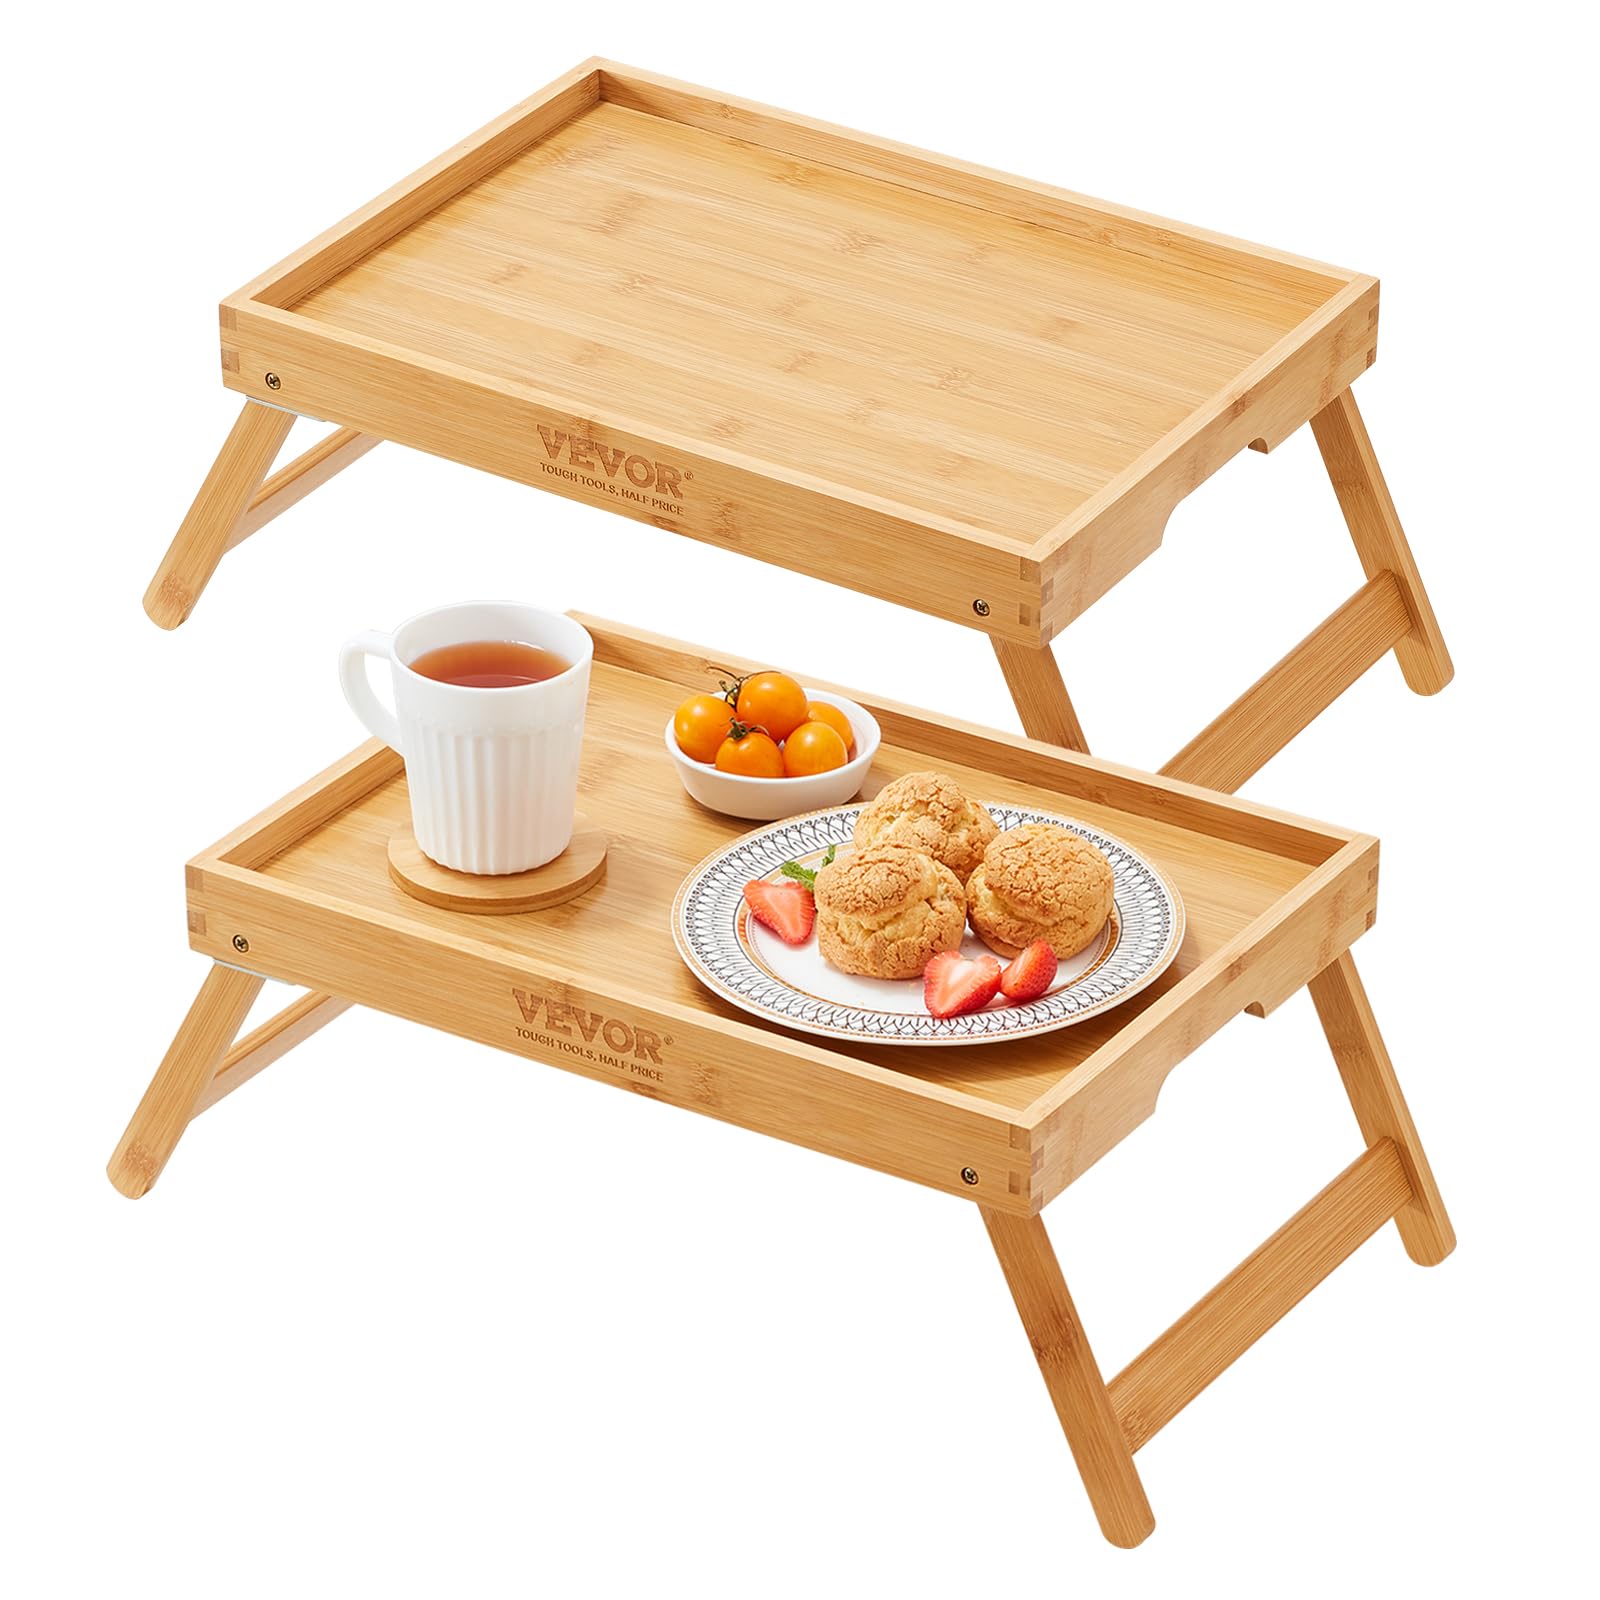 VEVOR 2-Pack Bed Tray Table with Foldable Legs, Bamboo Breakfast Tray for Sofa, Bed, Eating, Snacking, and Working, Folding Serving Laptop Desk Tray, Portable Food Snack Platter for Picnic, 15.7